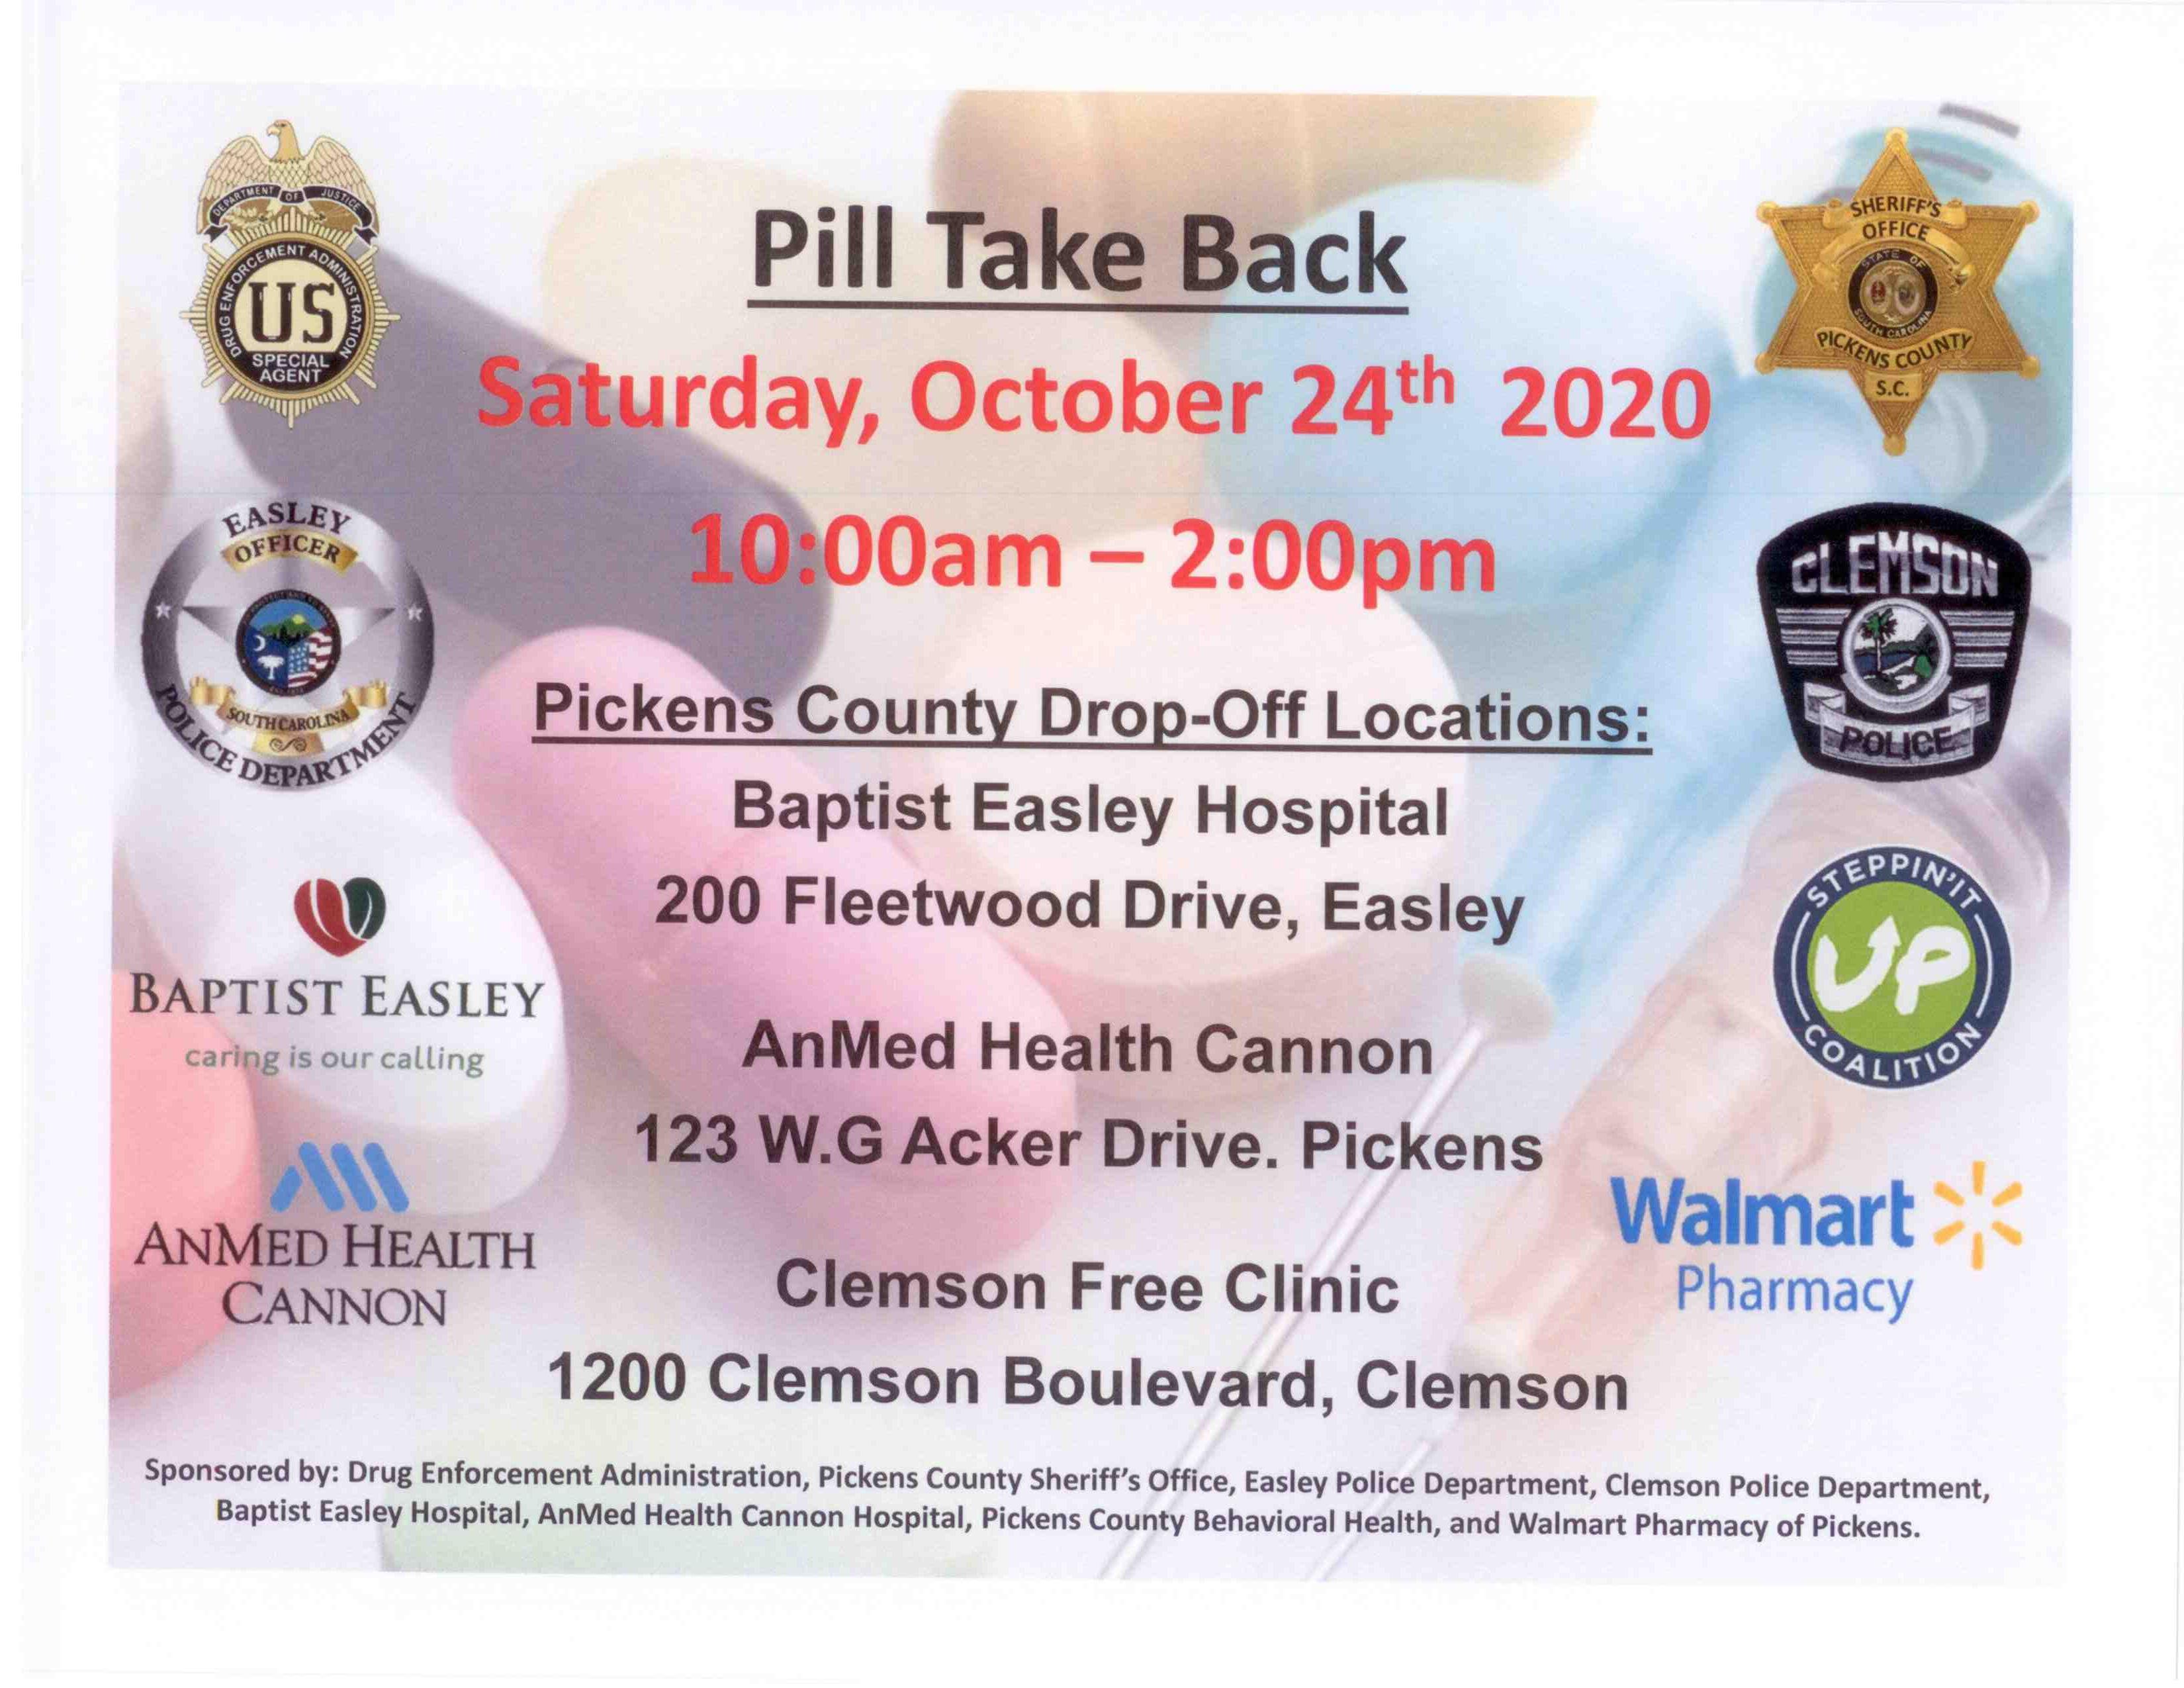 Pill Take Back October 24th, 2020